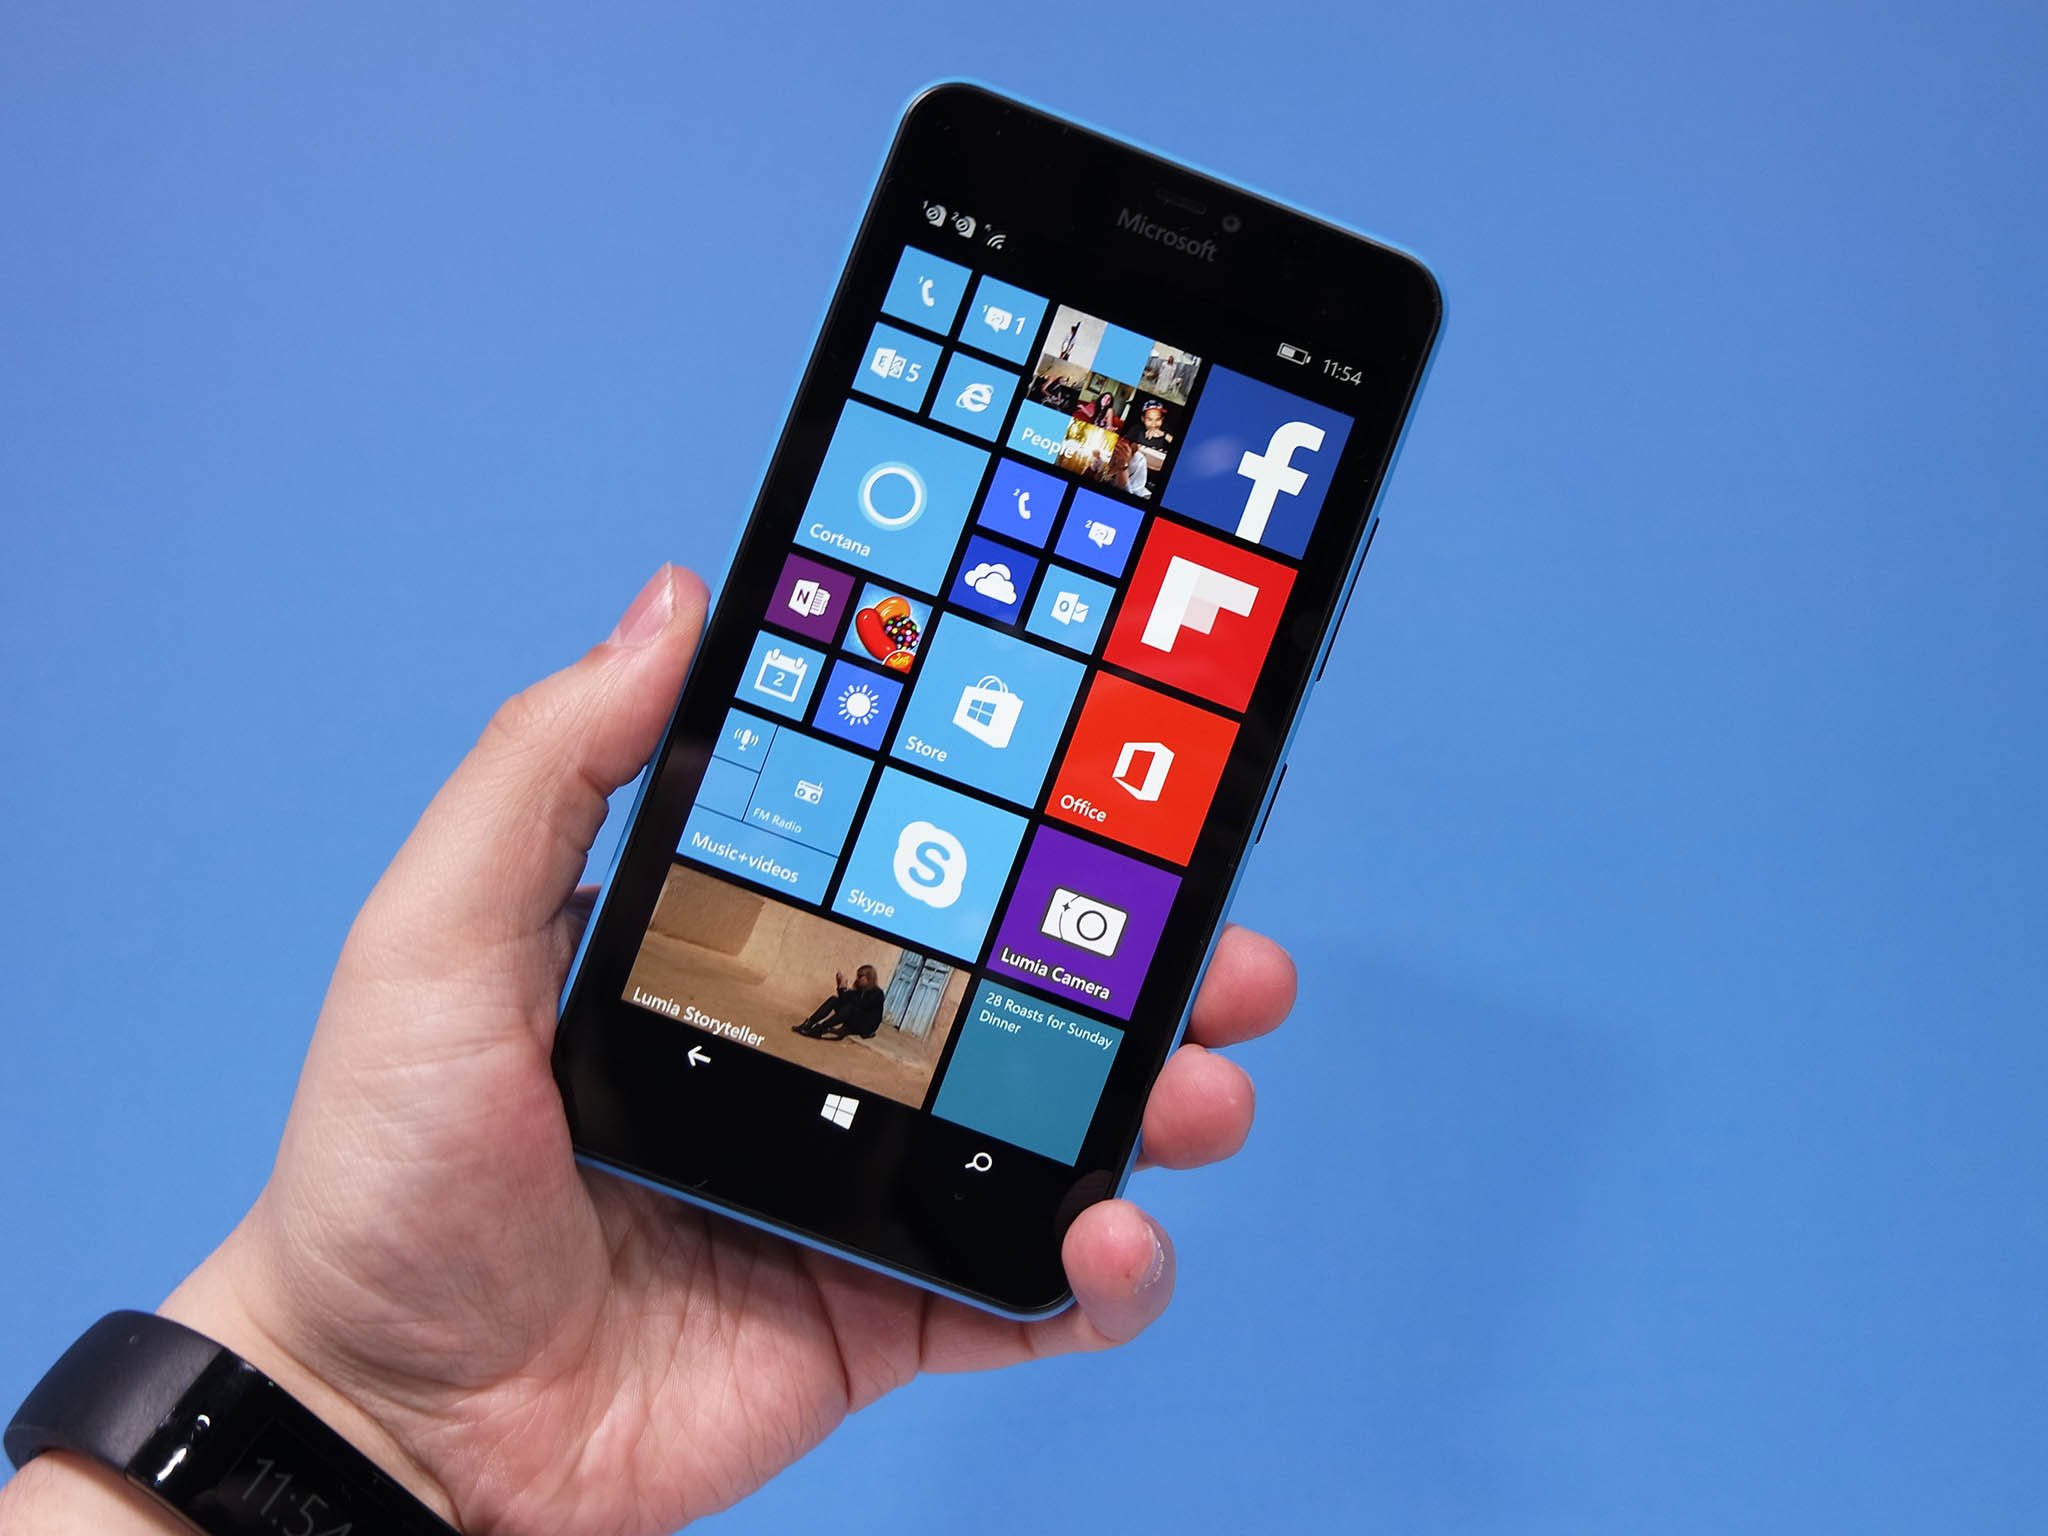 at-t-now-selling-the-lumia-640-xl-for-249-99-without-a-contract